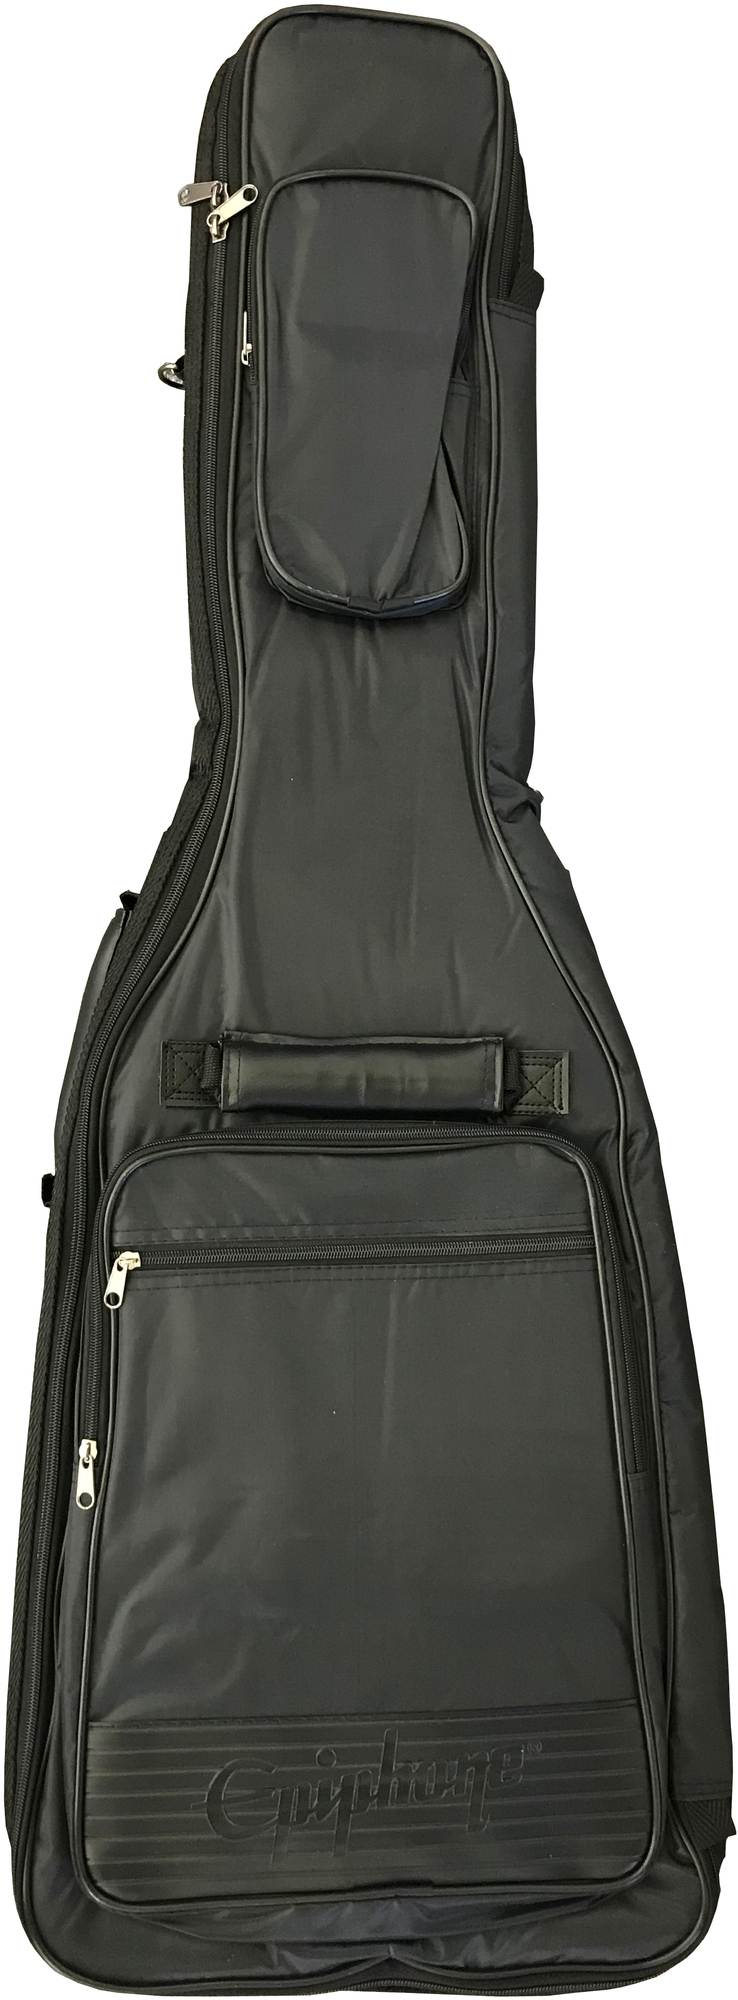 Epiphone Electric Guitar Deluxe Gig-Bag